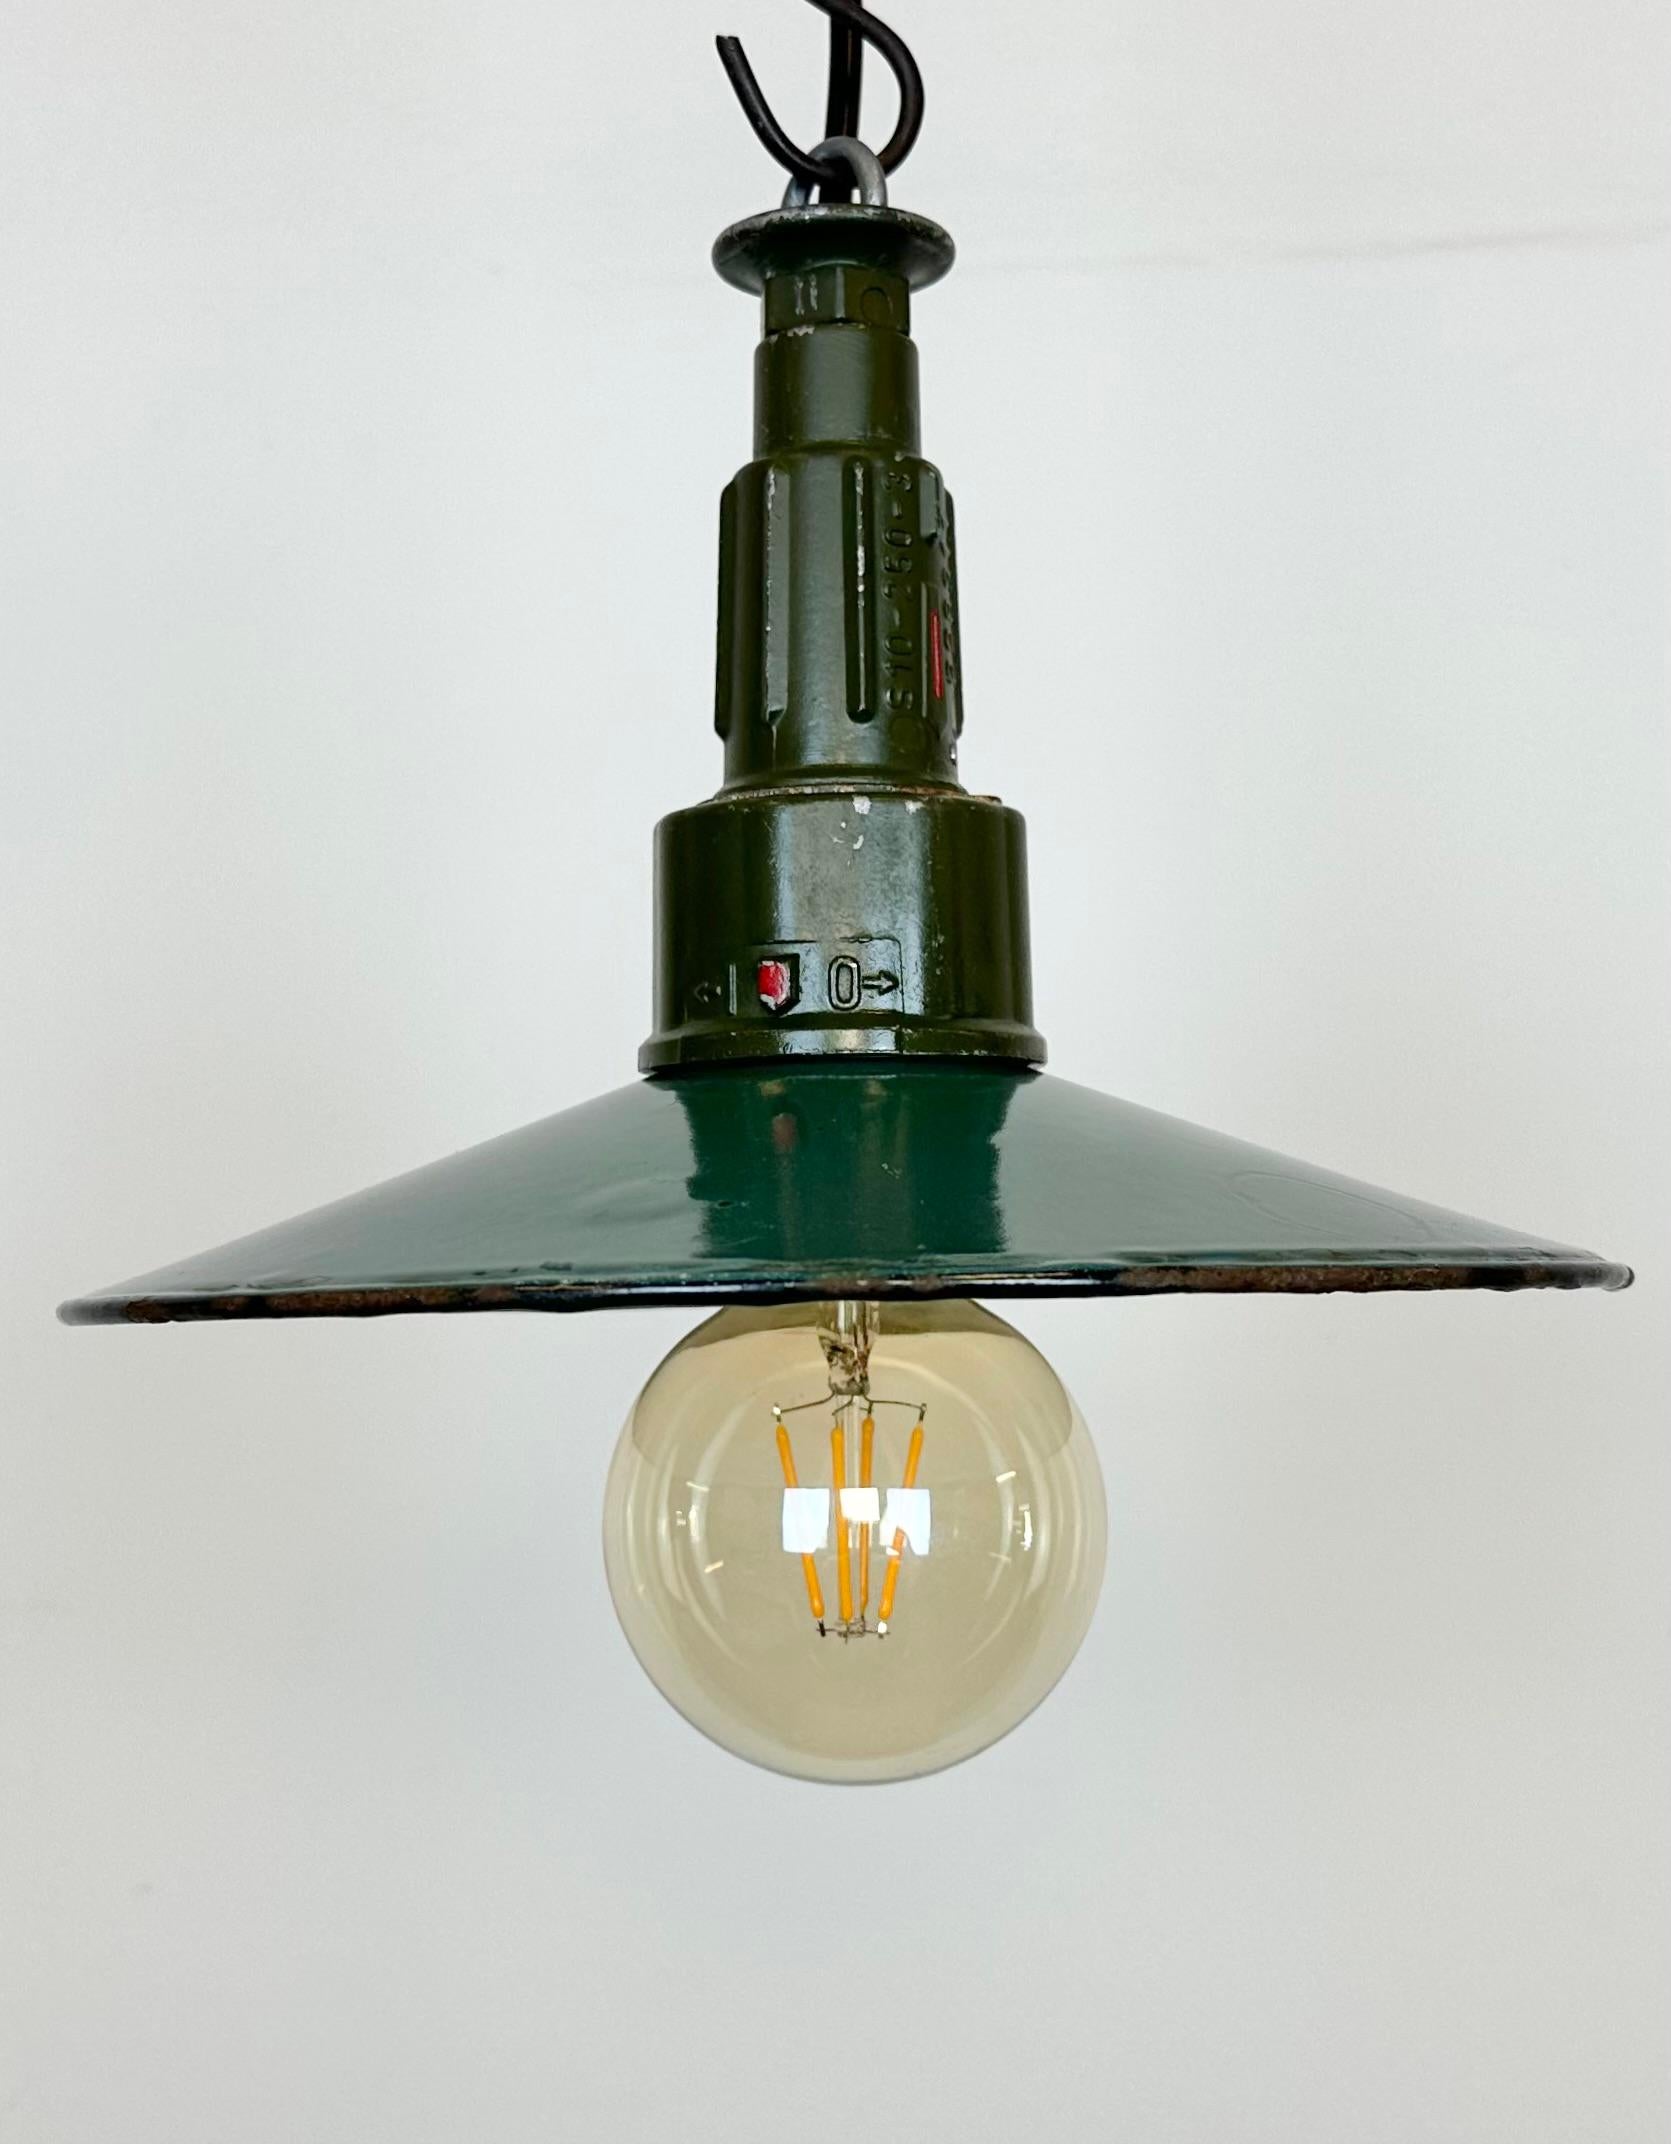 Industrial petrol enamel pendant light made in Poland during the 1960s. White enamel inside the shade. Green cast aluminium top. The socket requires standard E 27/ E26 light bulbs. New wire. The weight of the lamp is 0.5 kg.
The light bulb is not